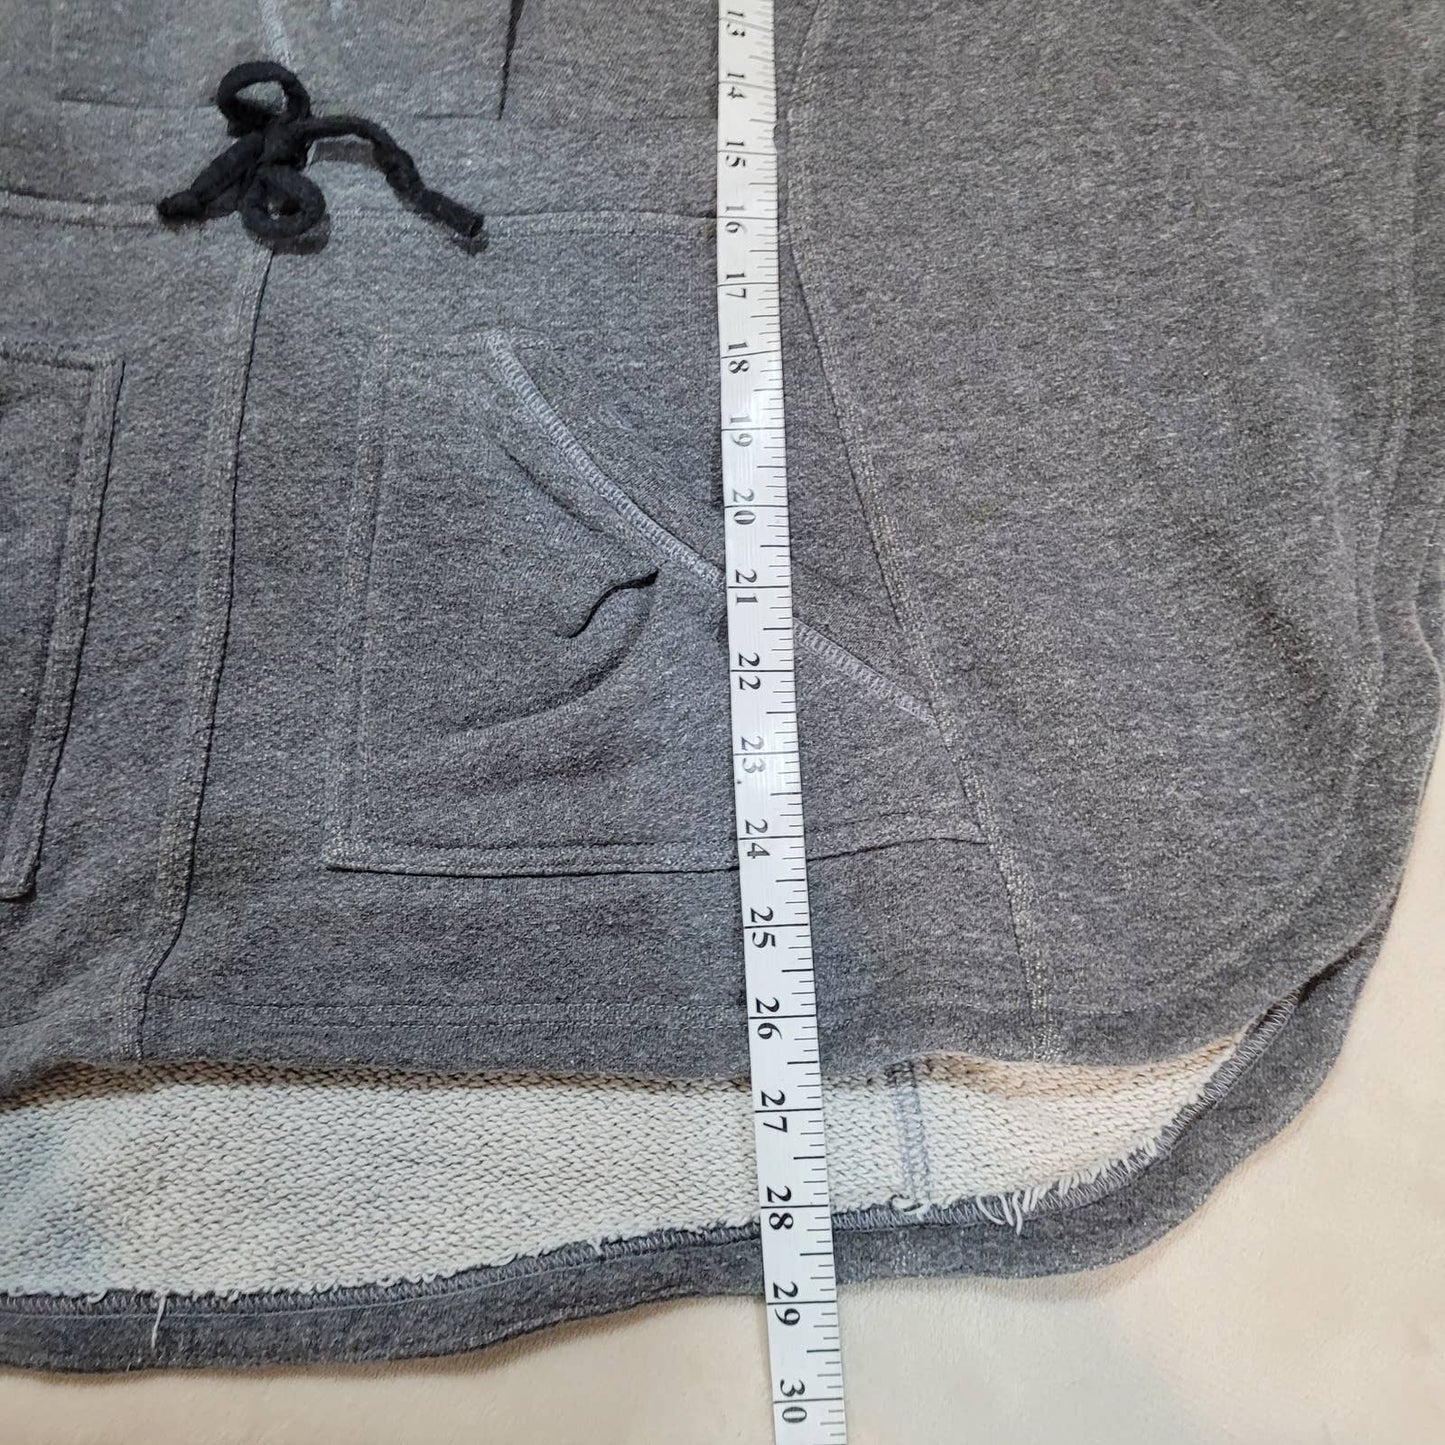 Karma Gray Terry Sweater - Size Large